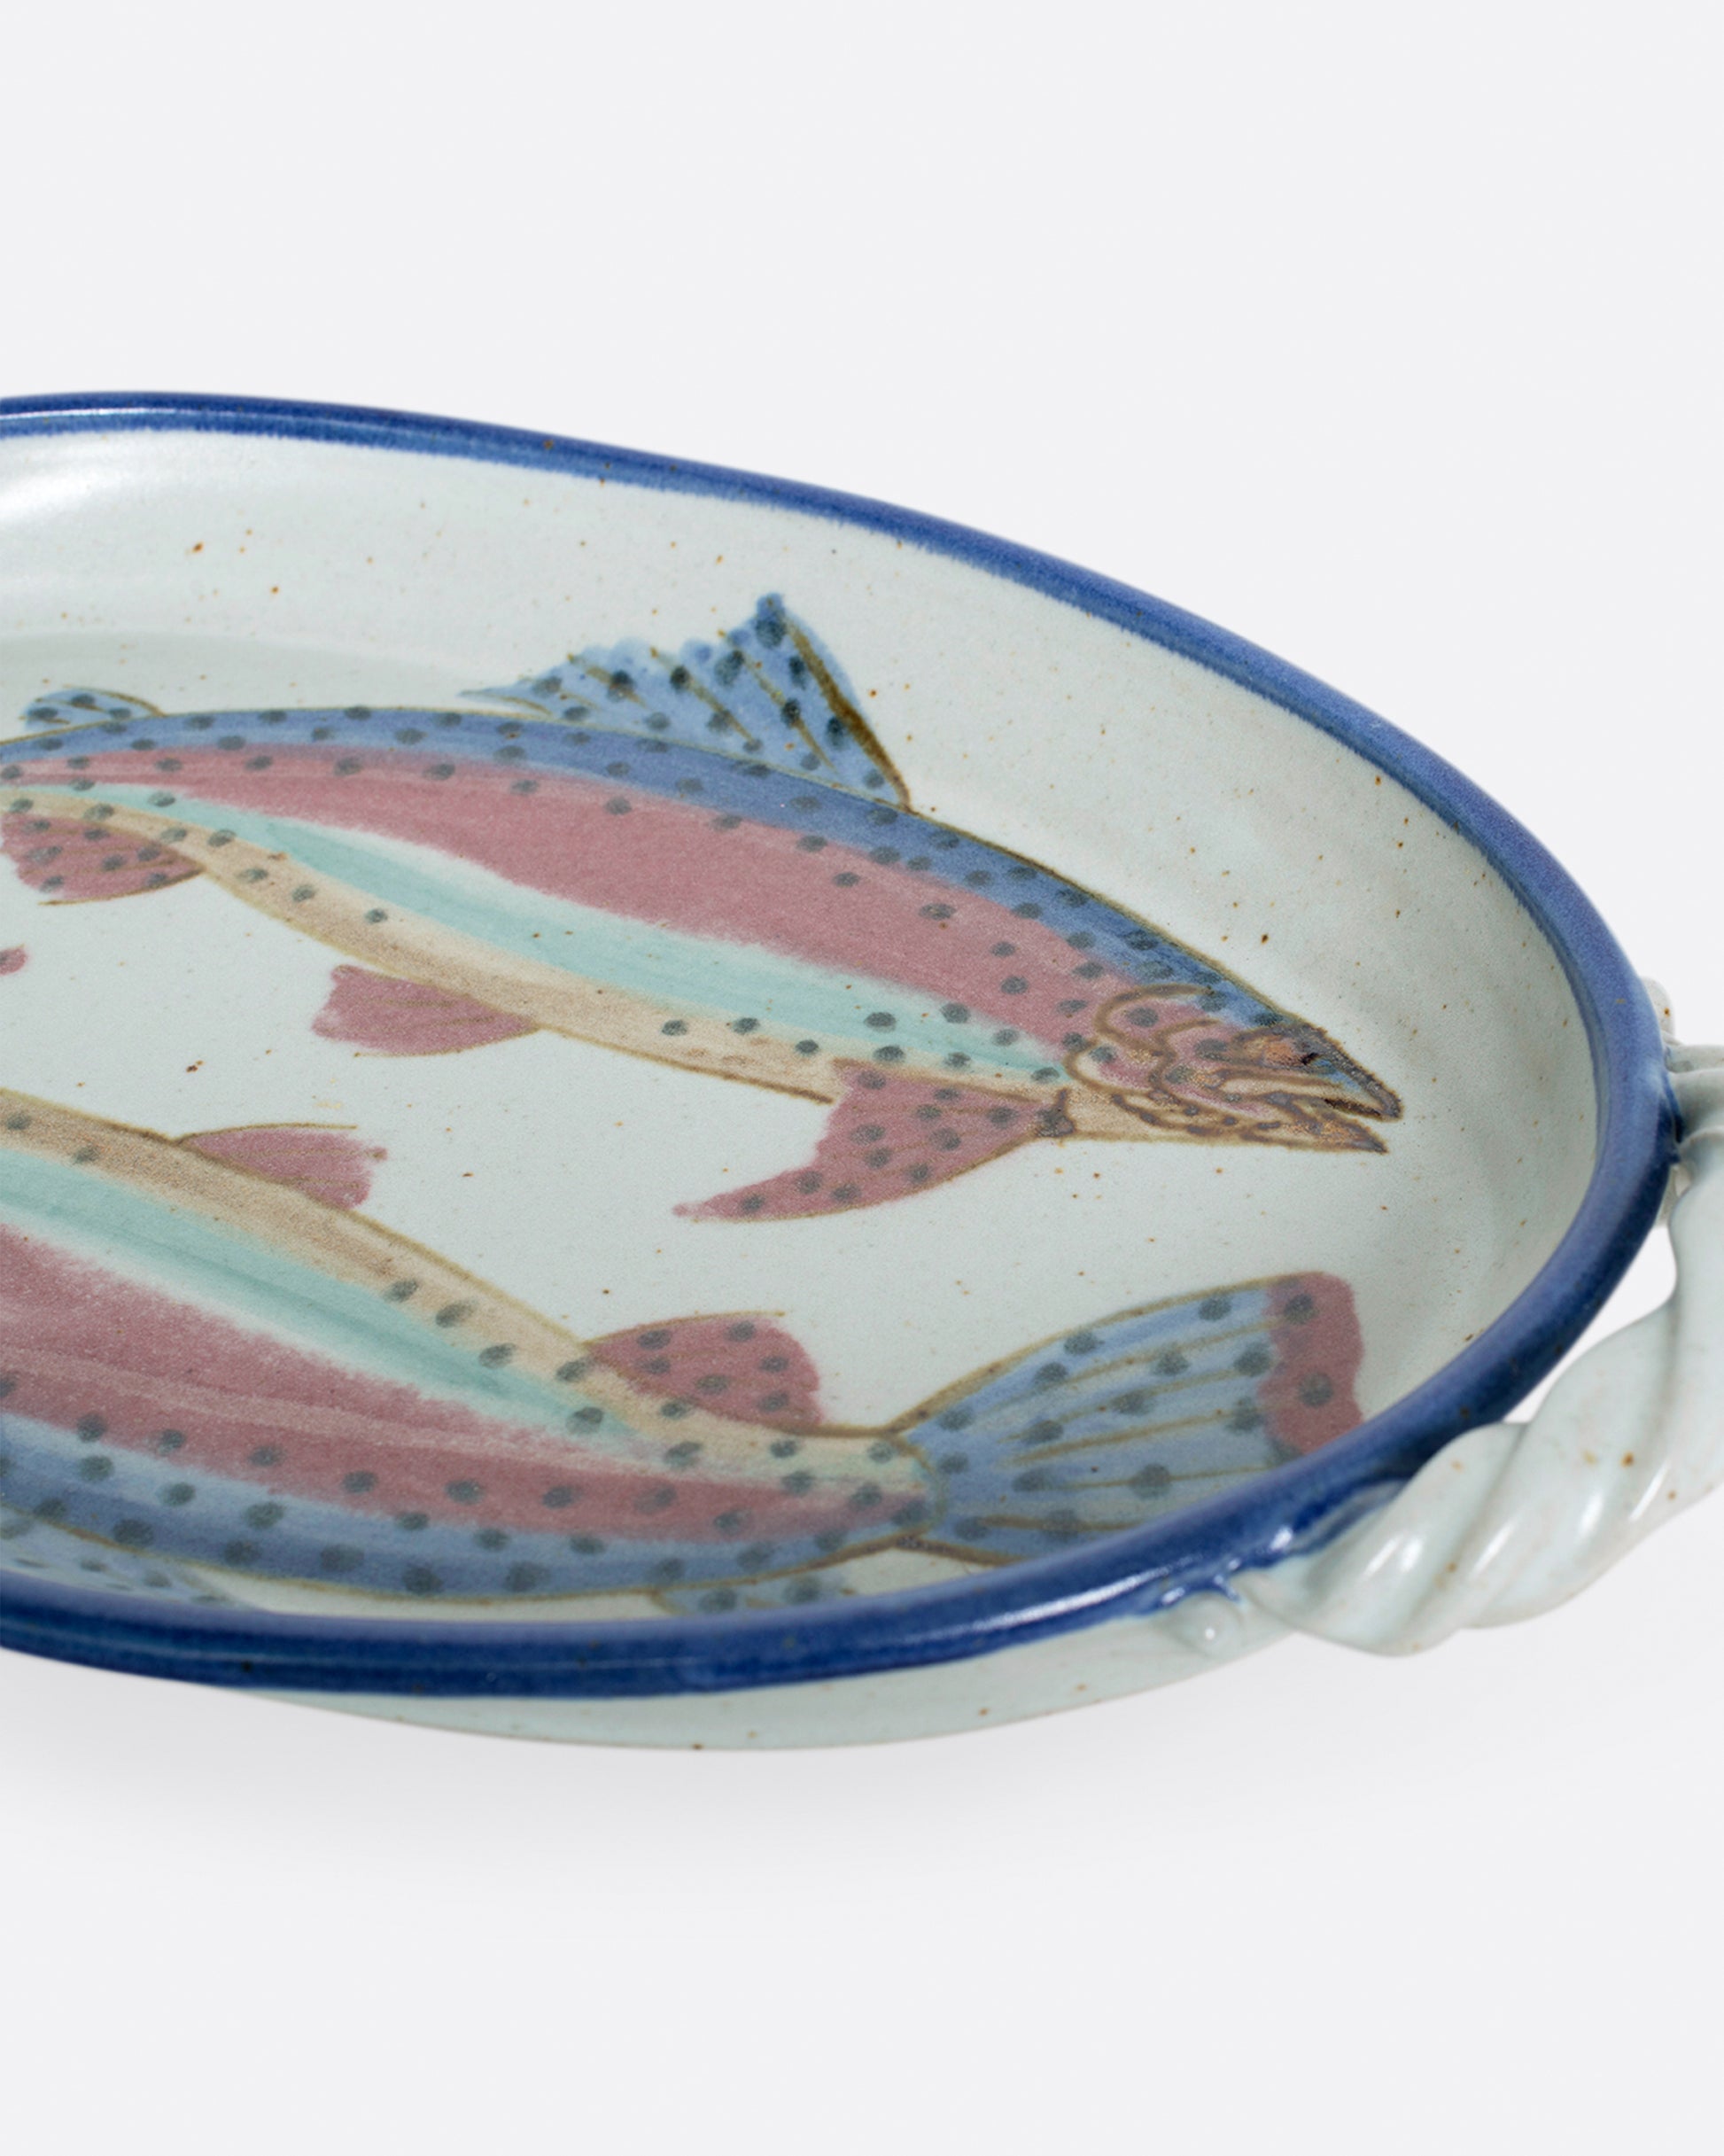 These two look like they're swimming in around in this shallow serving dish.